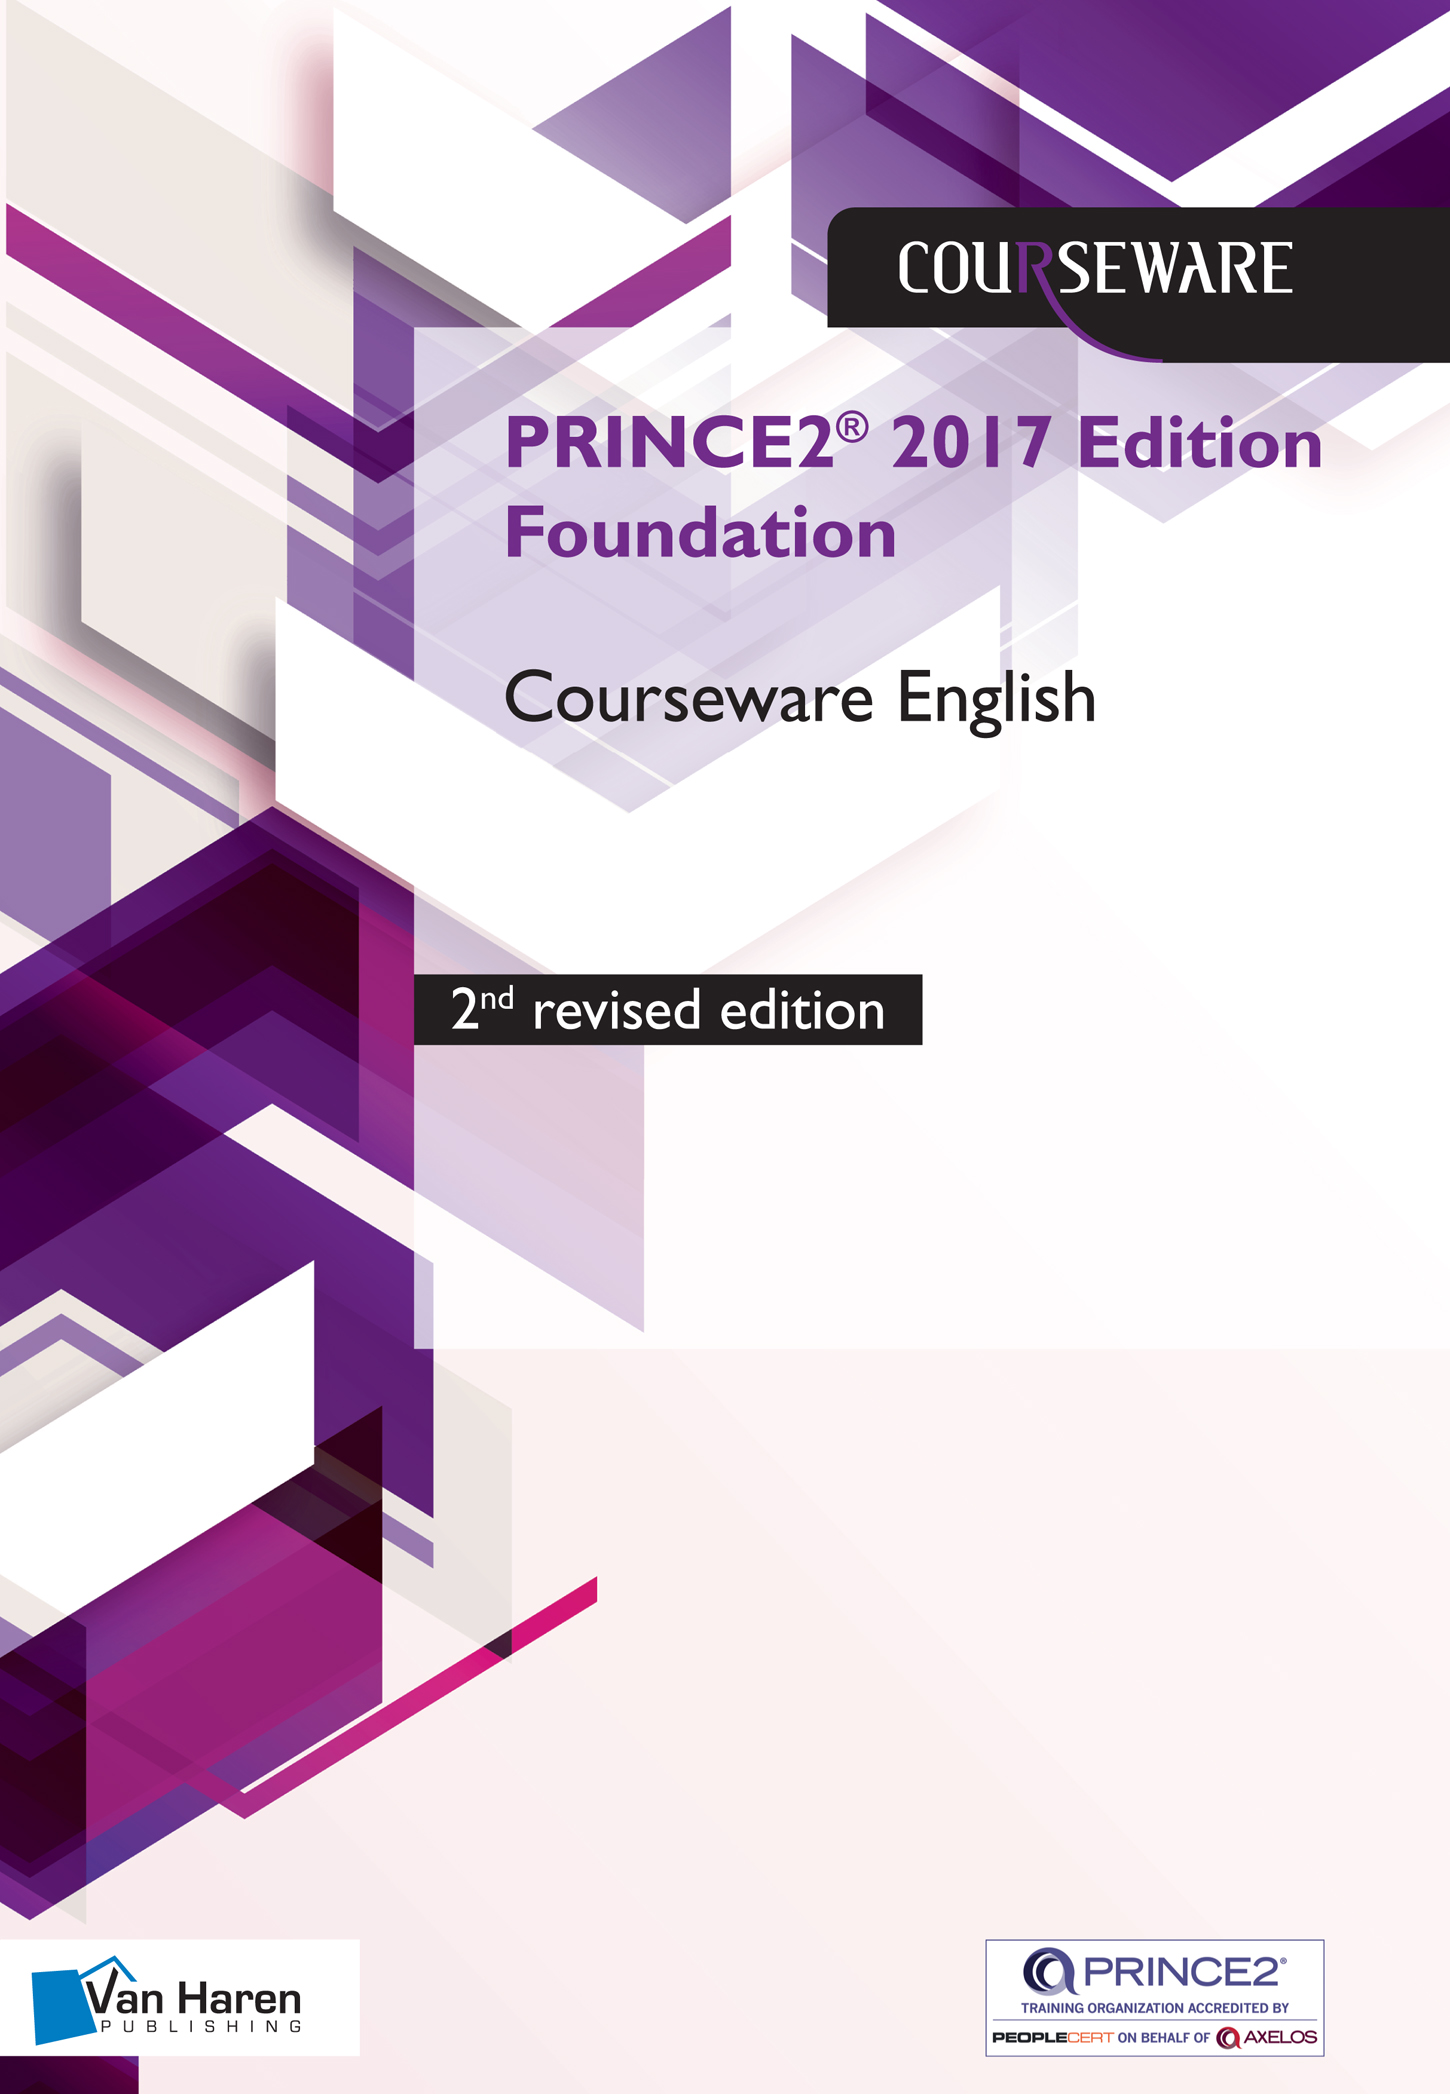 PRINCE2® 2017 Edition Foundation Courseware English - 2nd reviewed edition